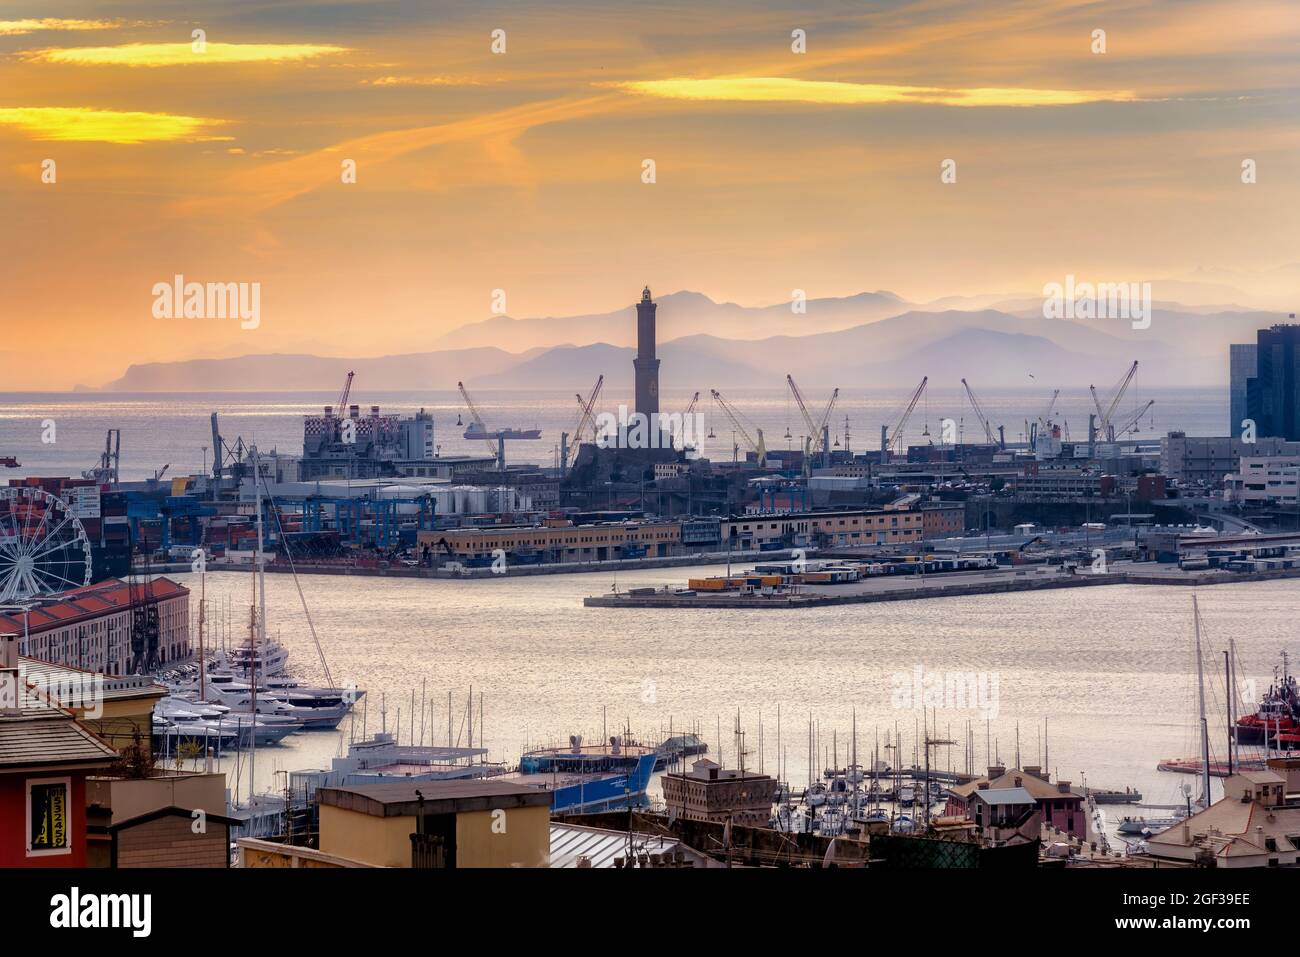 Genova, Italy - February 24, 2019: View of The Port and the lighthouse at sunset. The Port of Genoa is the major seaport of Italy Stock Photo